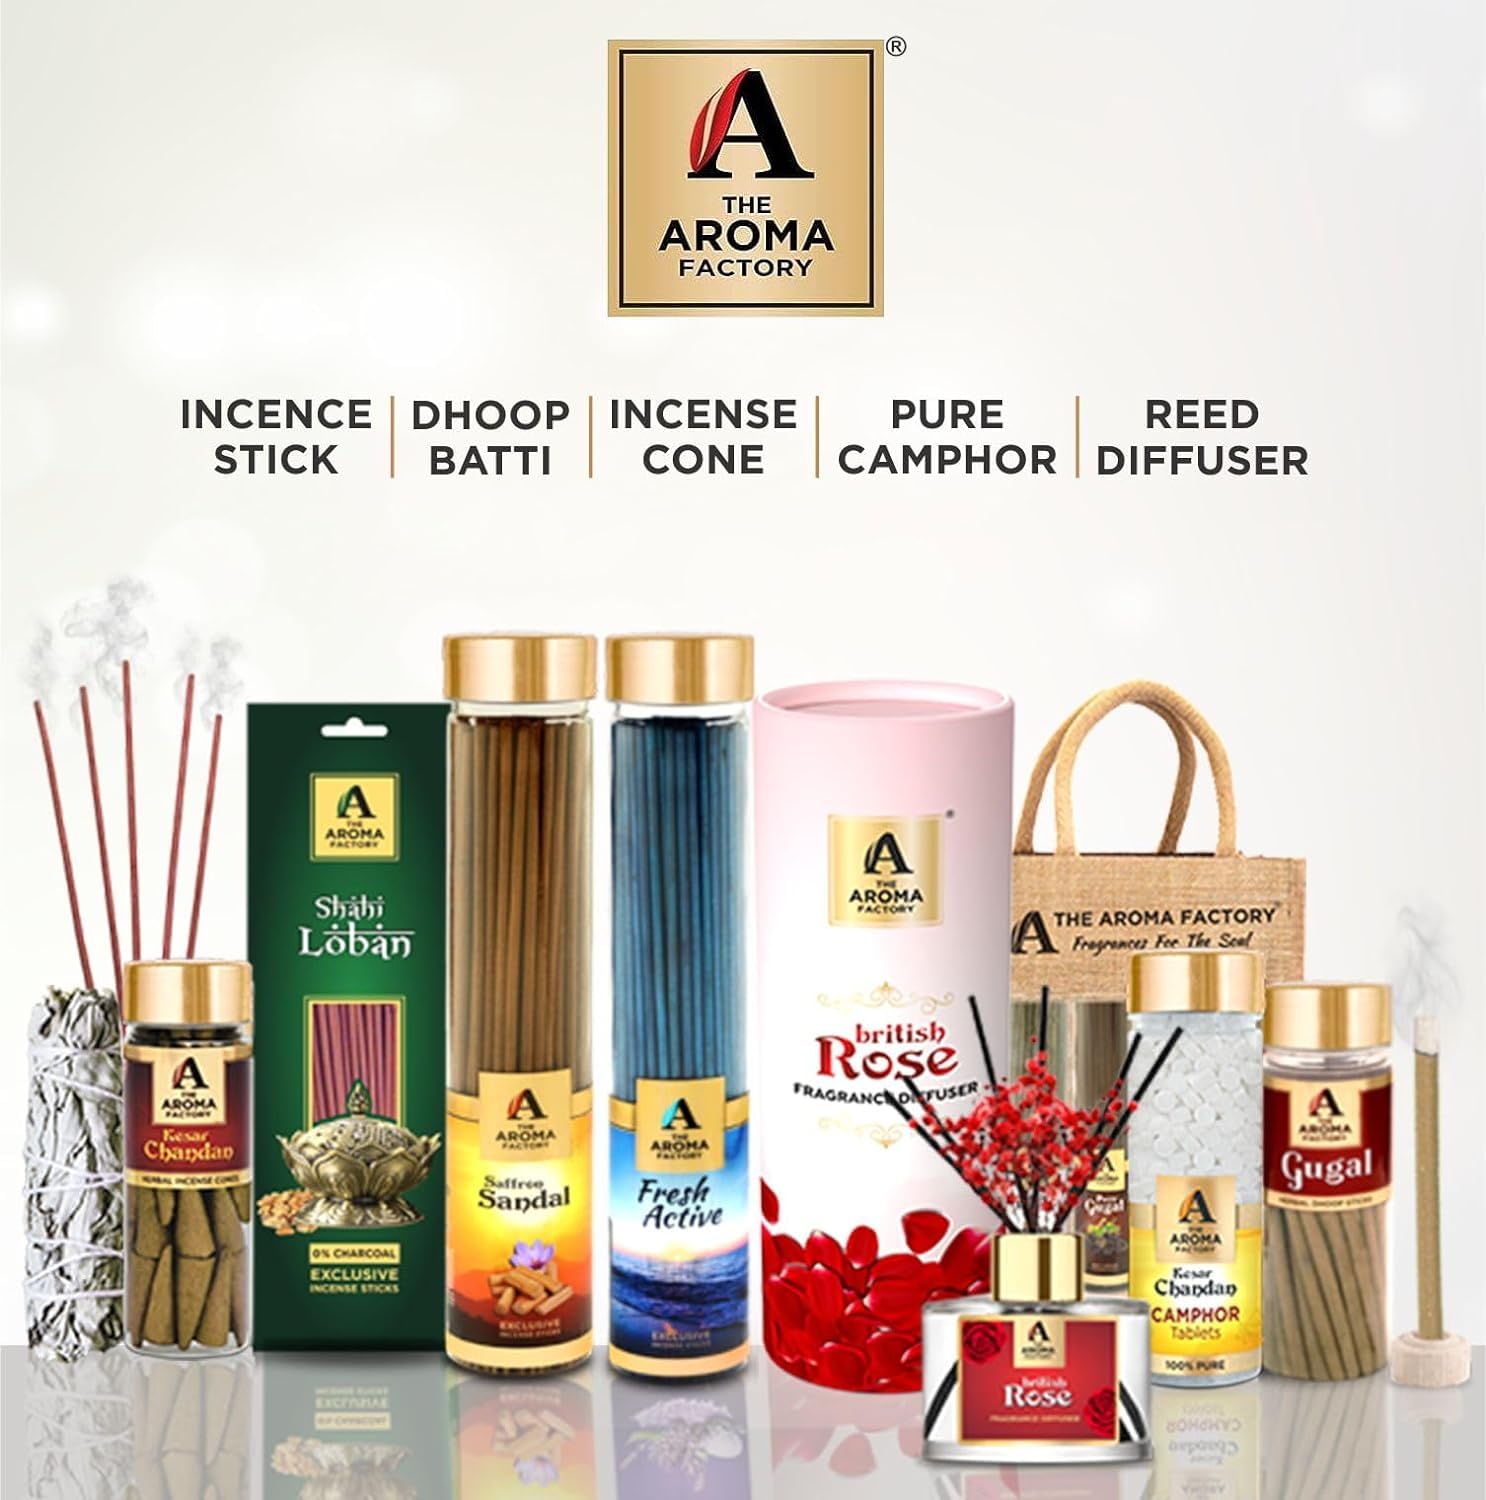 The Aroma Factory Happy Birthday Teacher Gift with Card (25 Swad Candy, Jasmine Agarbatti Bottle, Oudh Cone) in Jute Bag